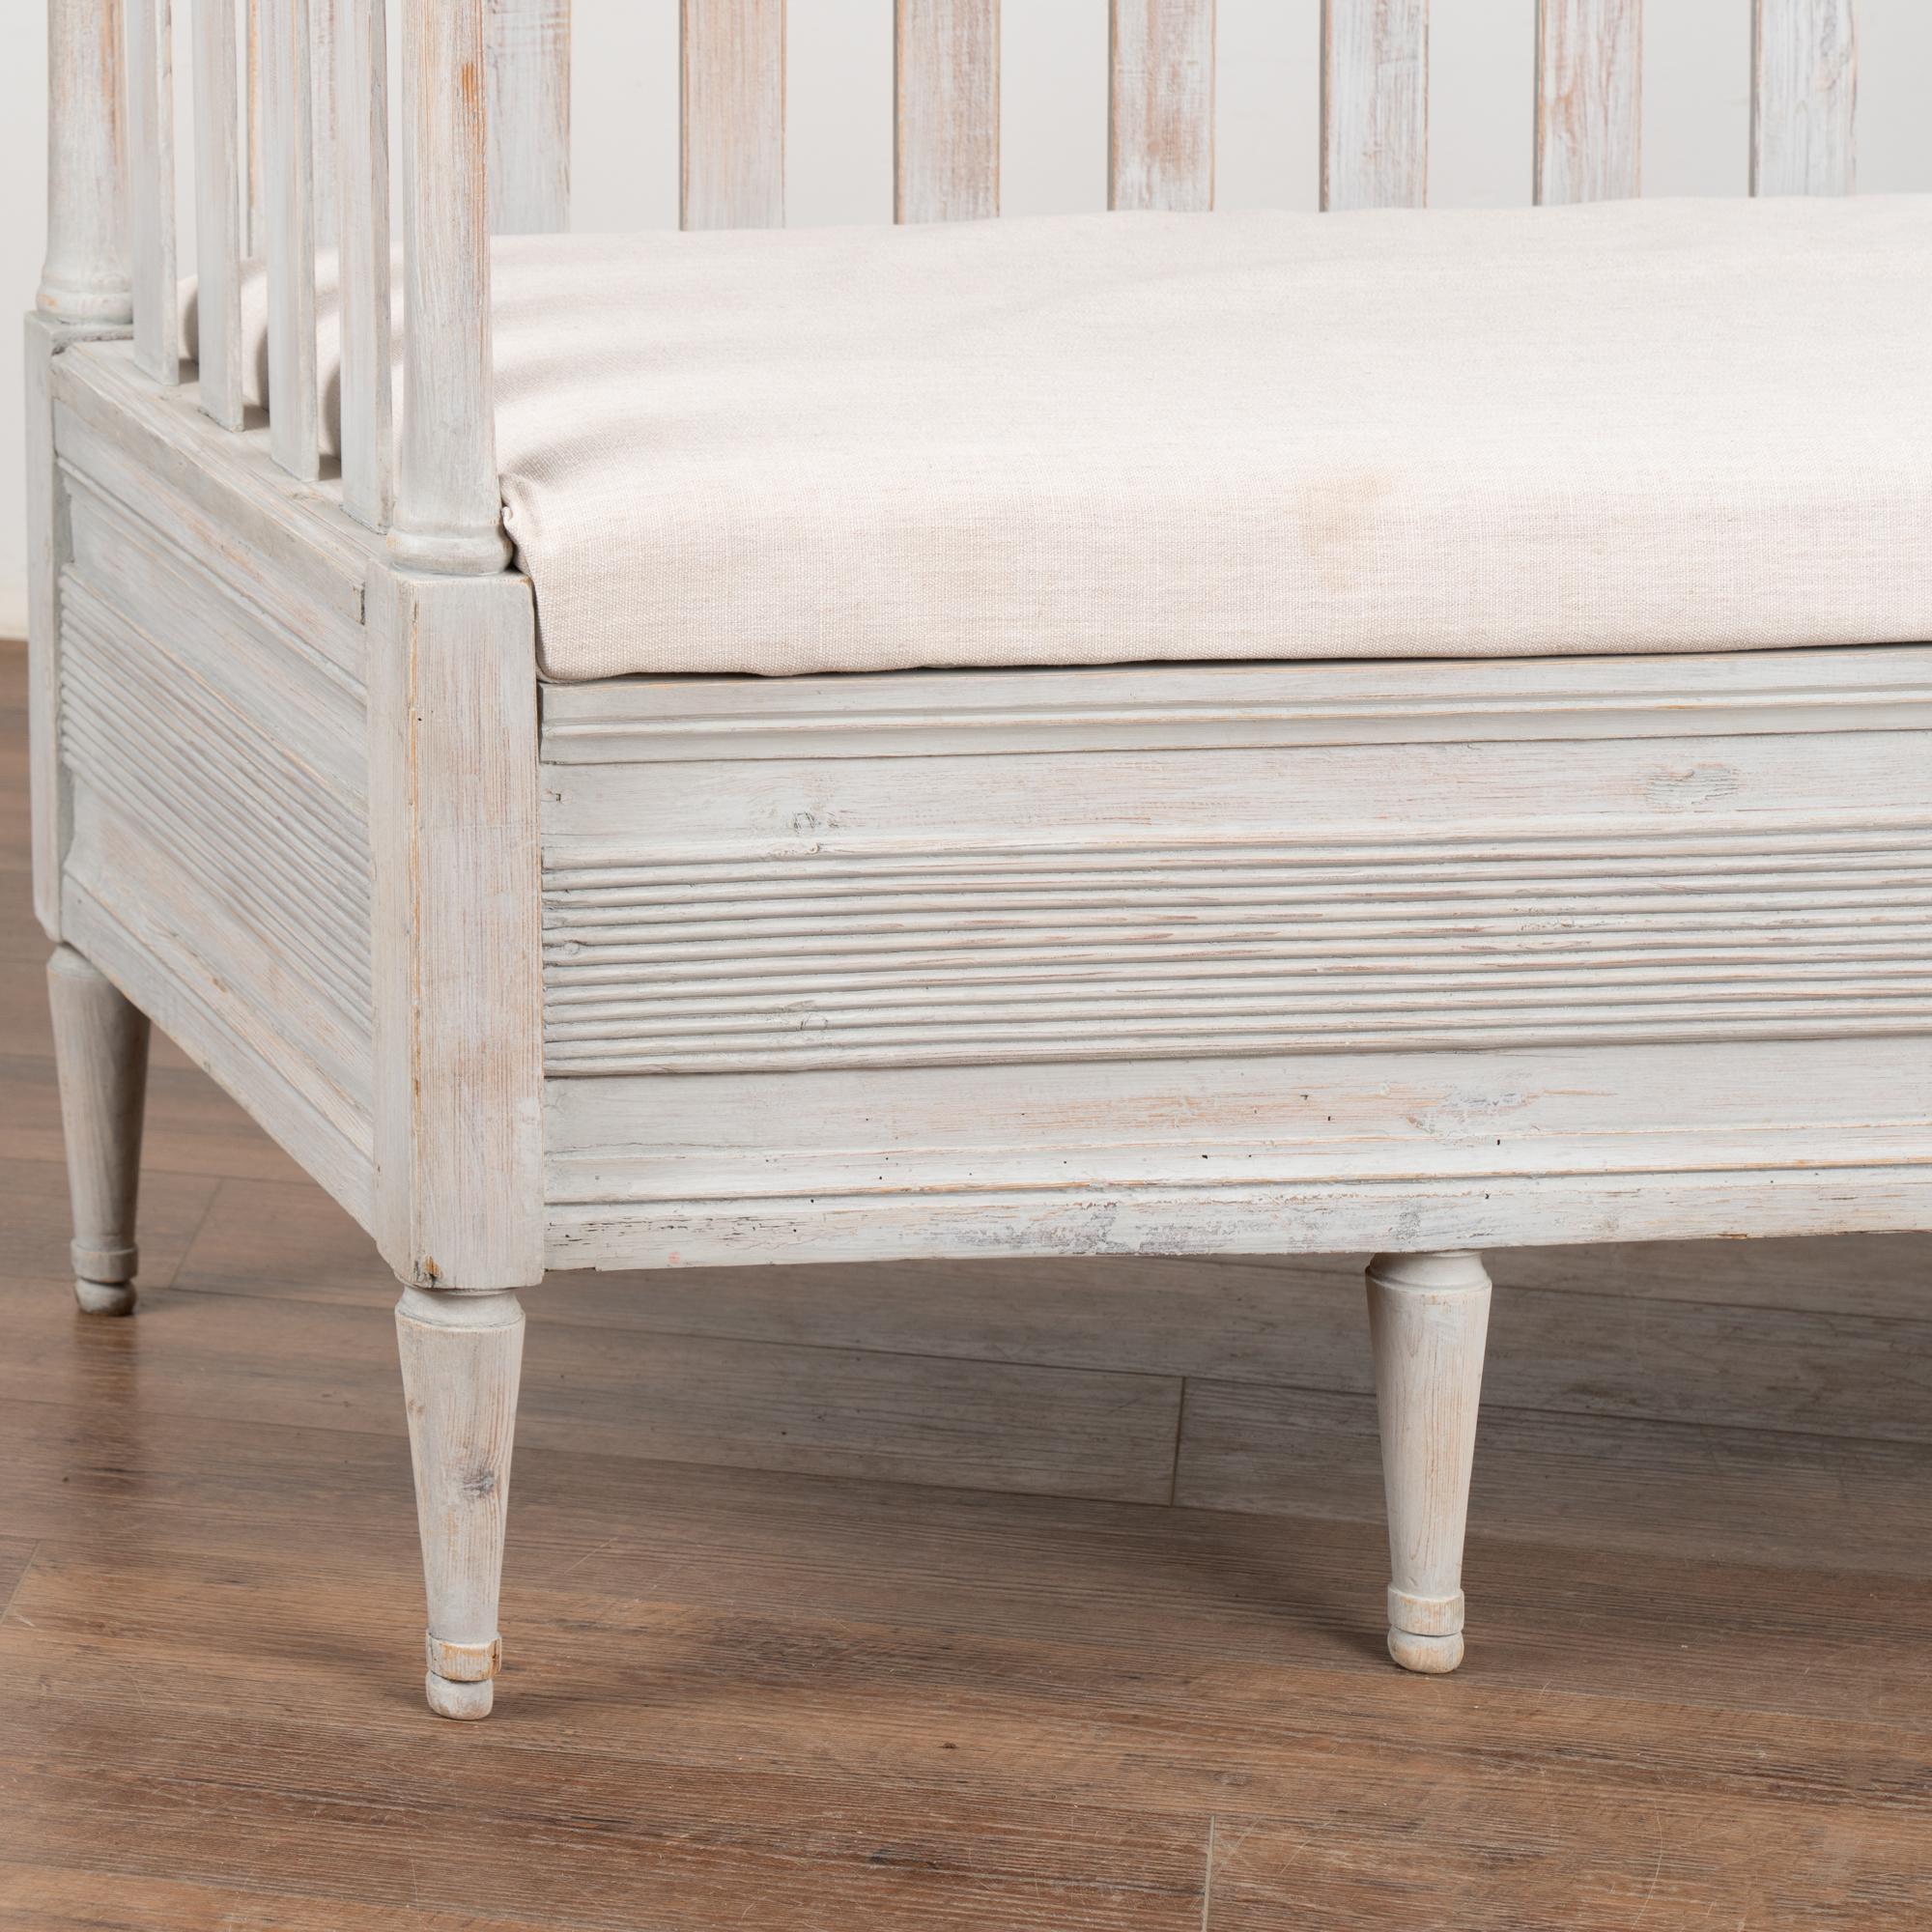 Linen Gray Painted Gustavian Bench With Storage, Sweden circa 1840